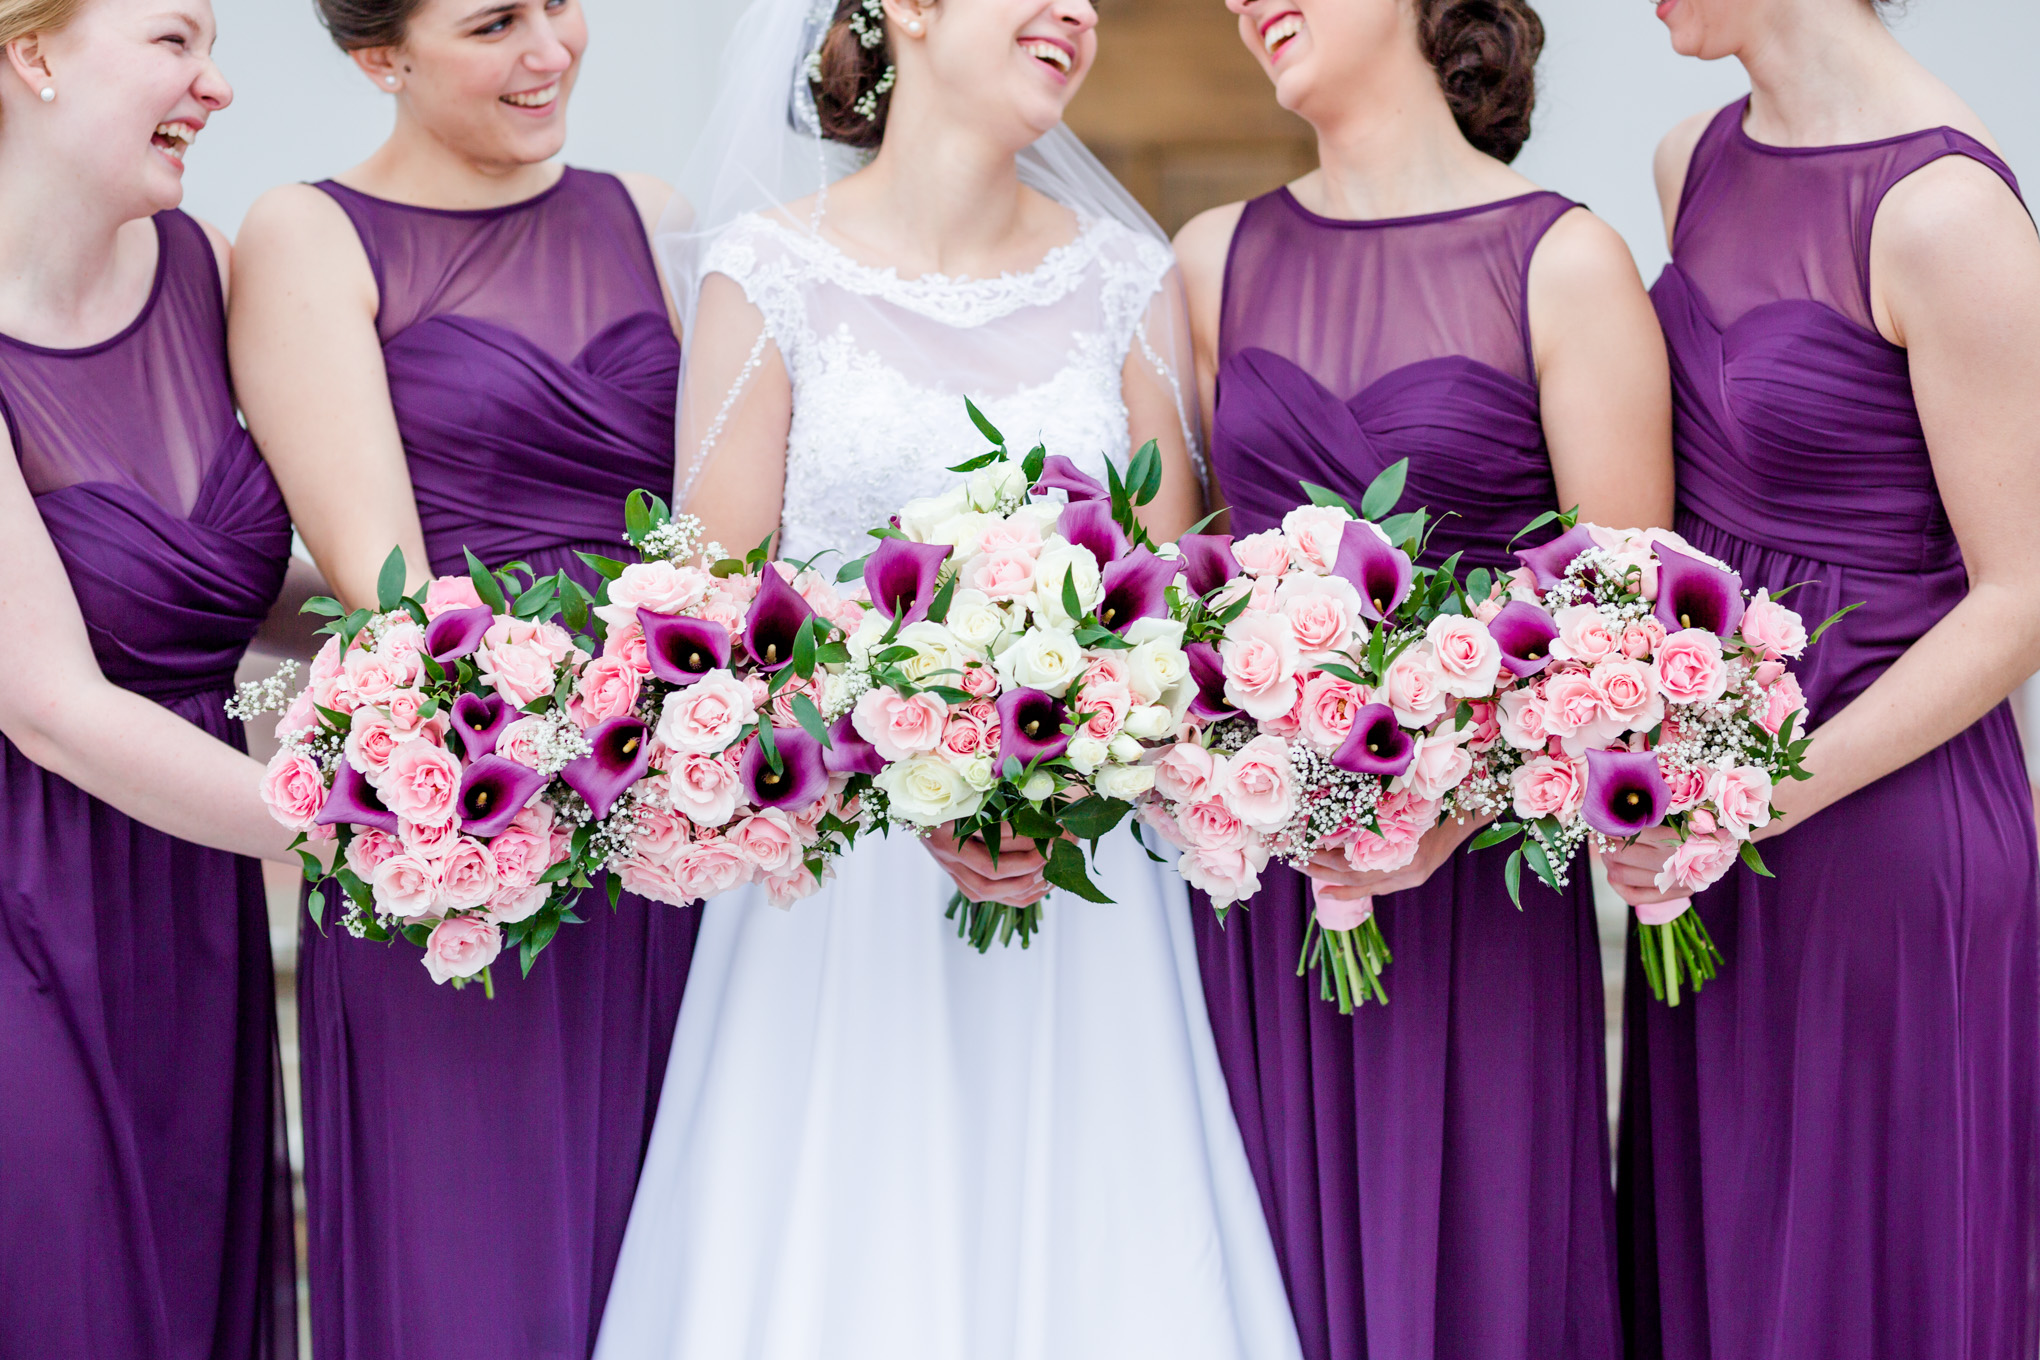 classic winter wedding in Maryland, winter wedding, classic winter wedding, classic wedding, elegant couple, purple aesthetic, church wedding, Maryland wedding, Rachel E.H. Photography, Maryland wedding photographer, natural light portraits, couple goals, relationship goals, classic wedding dress, winter white wedding, DC wedding photographer, Bell Flowers, winter bouquets, bridal party